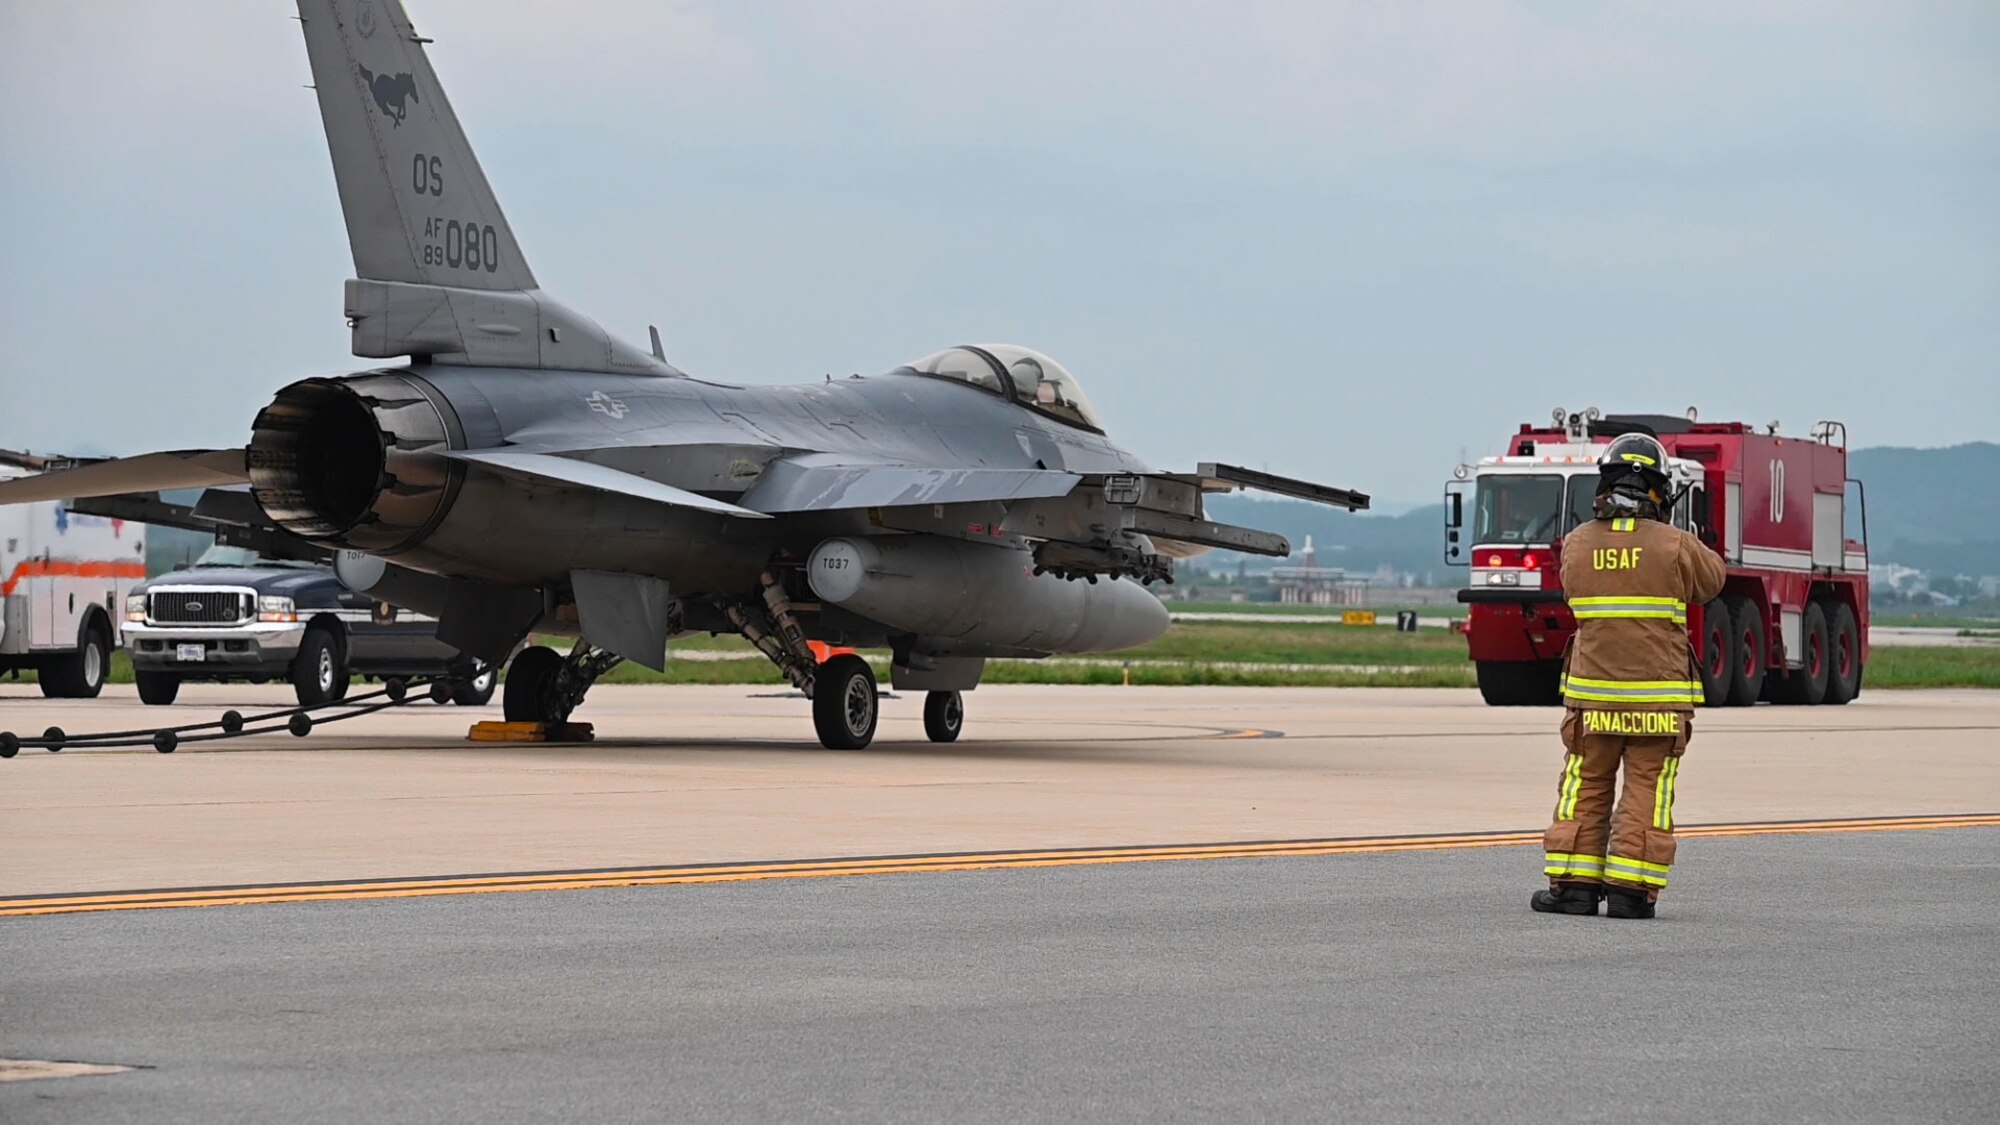 The F-16 tested the MAAS’ functionality by taxiing at a highspeed and latching on to the system causing the aircraft to come to a complete stop.